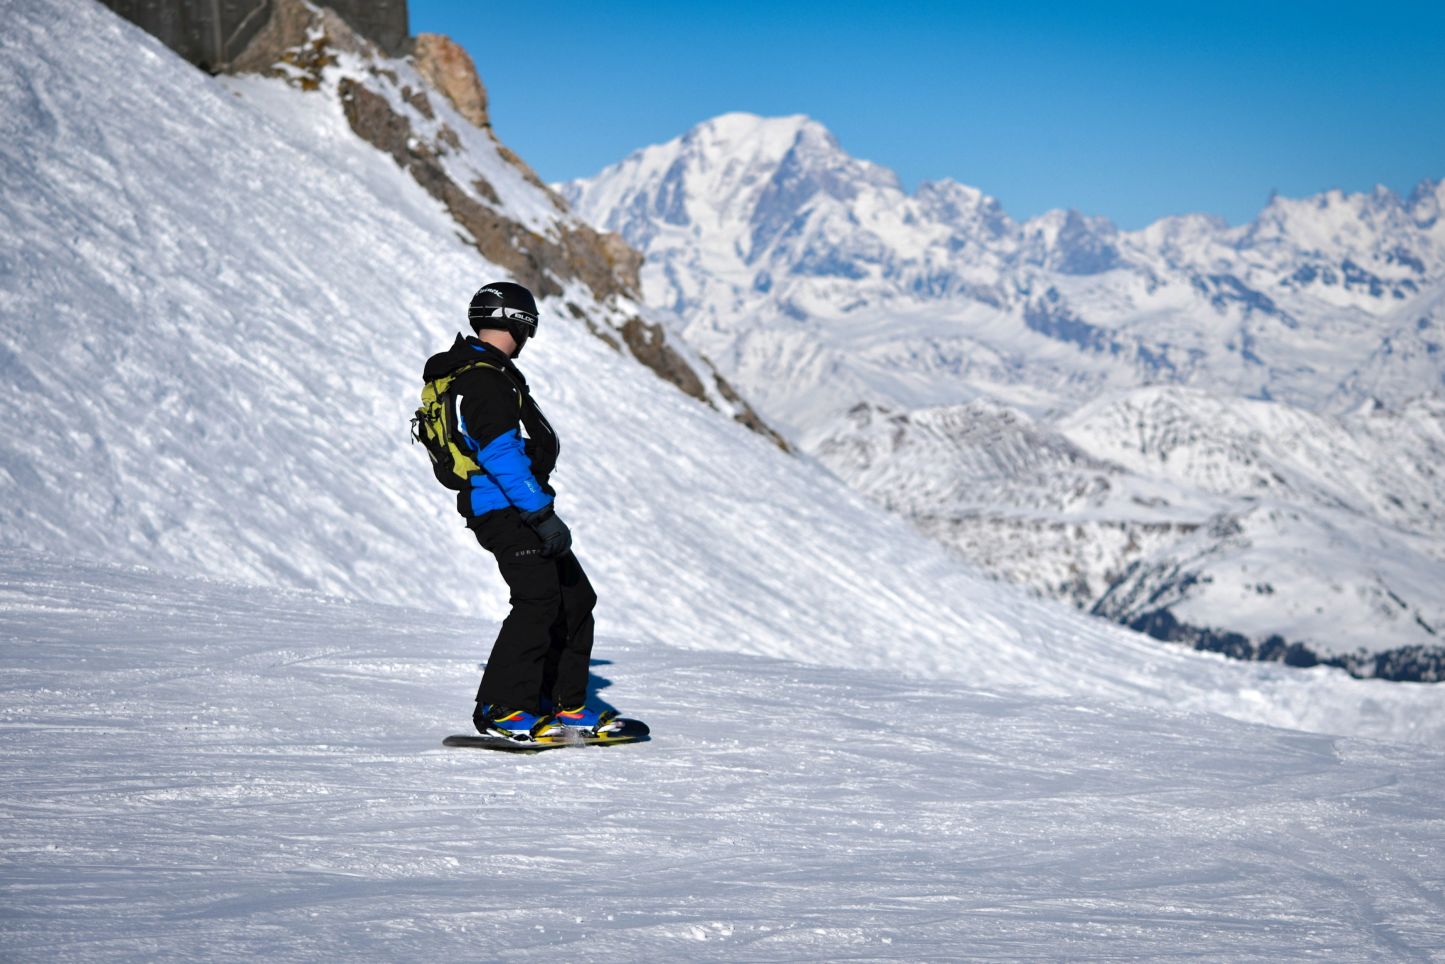 Snowboarders learning on a Snowboarding holidays for beginners